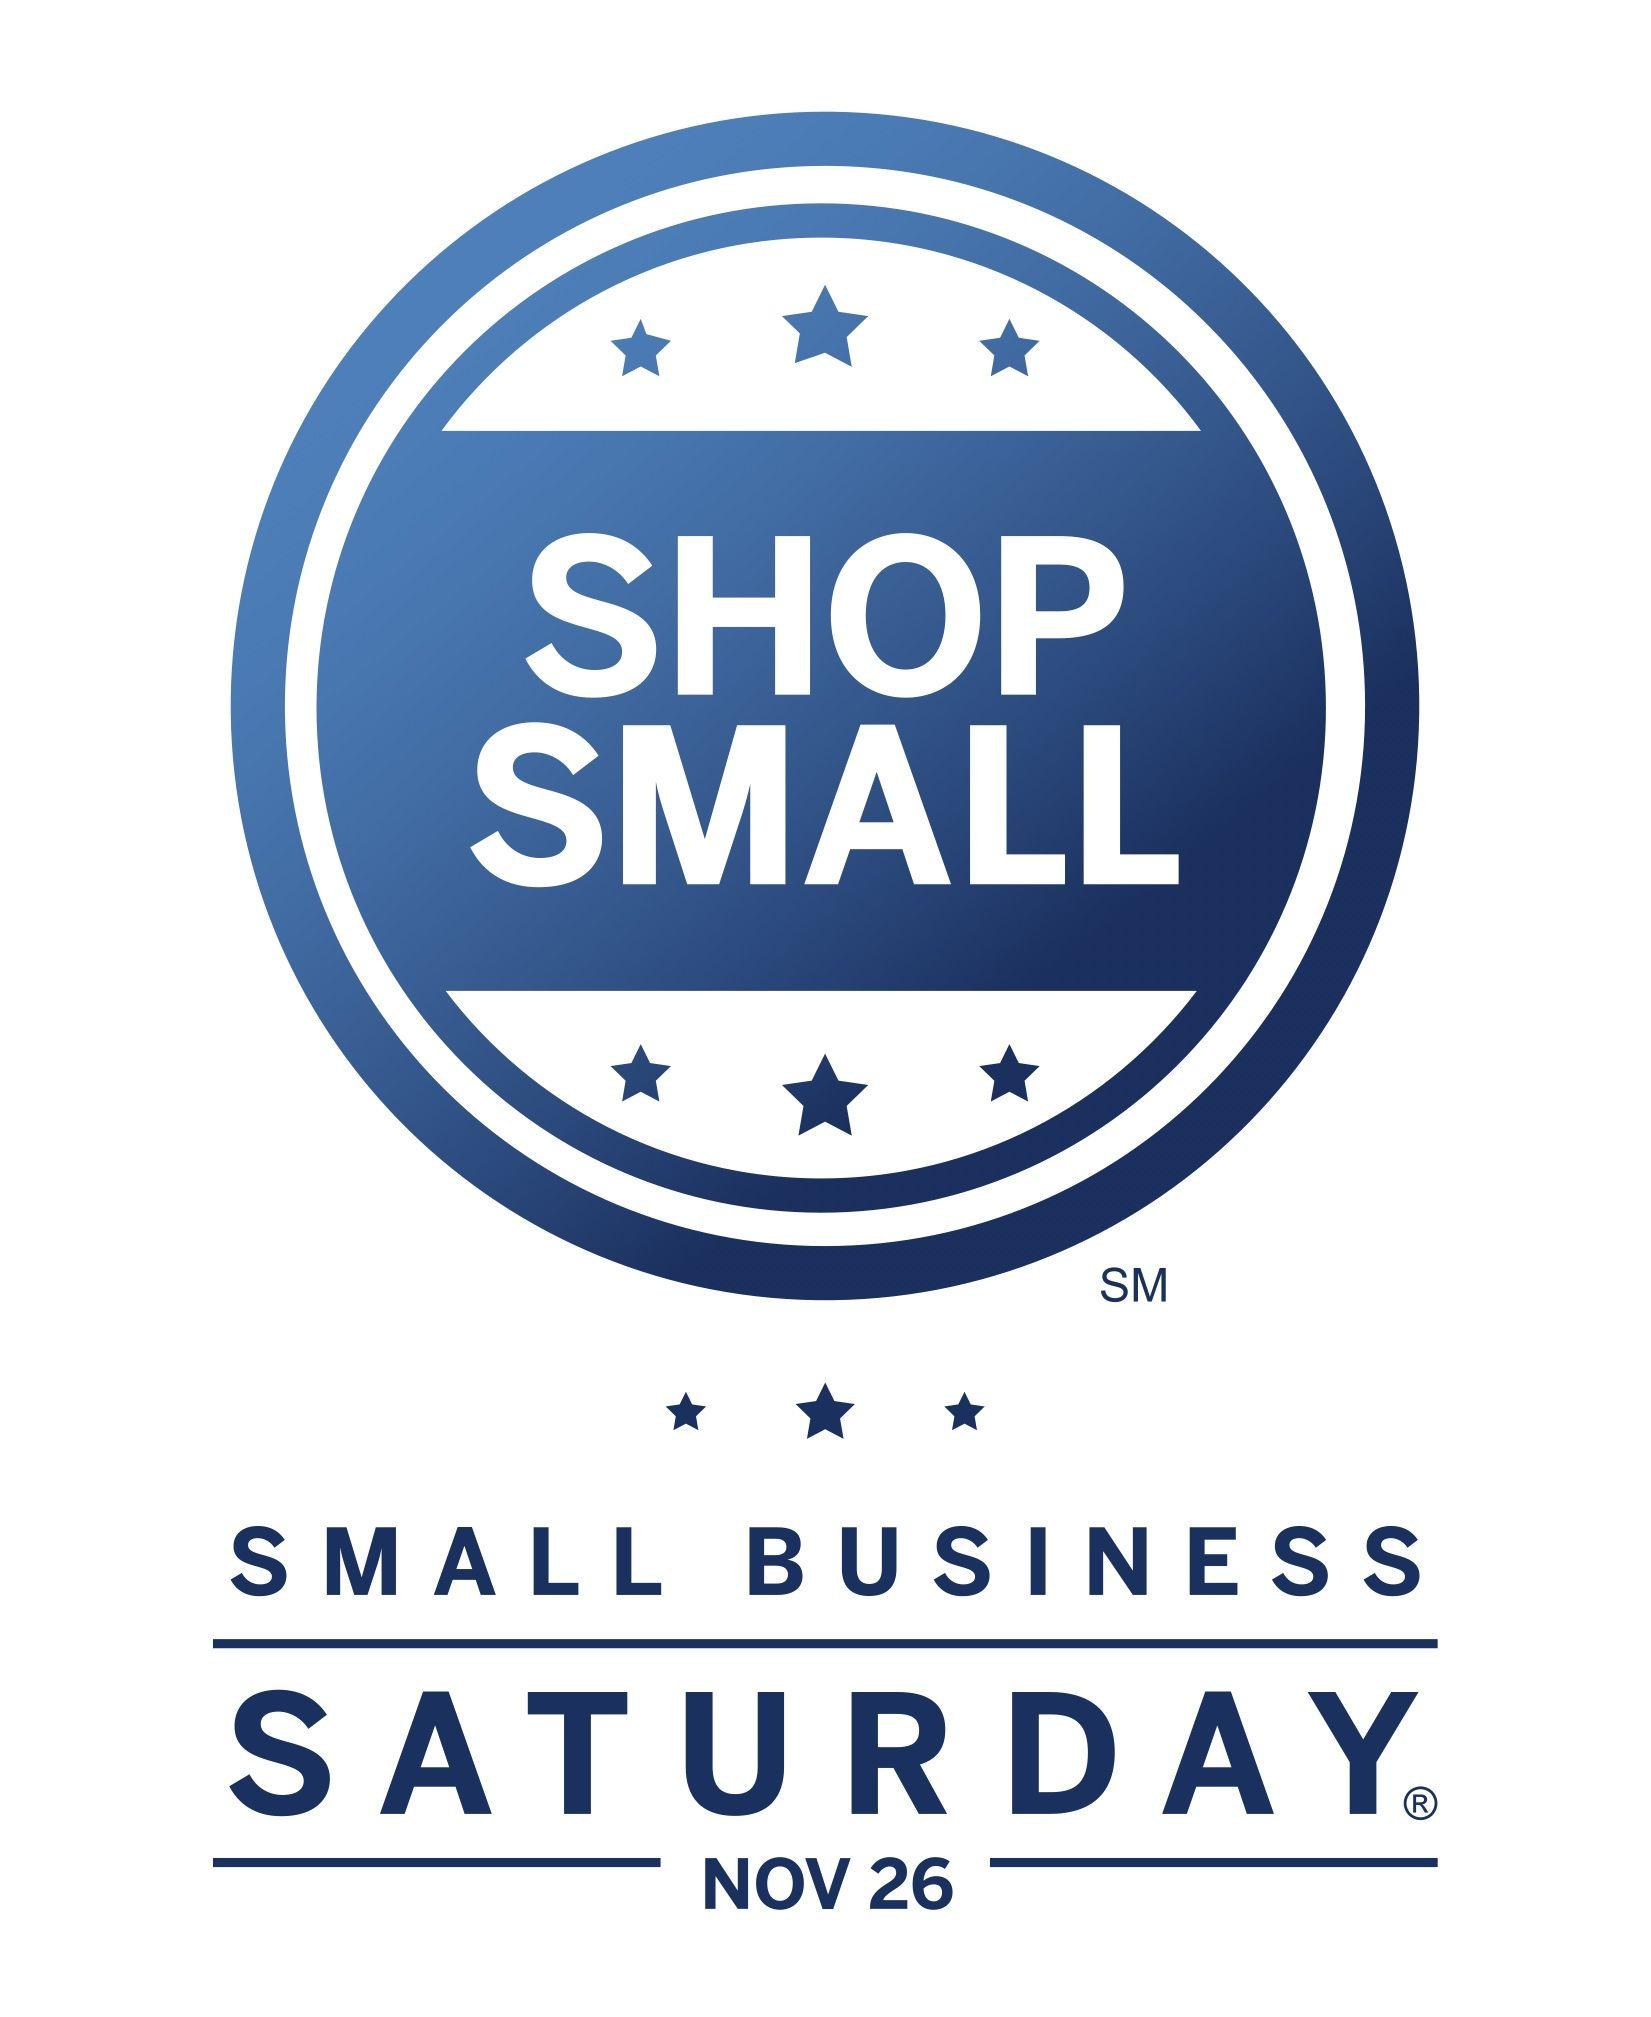 Shop Small Logo - Yola pledges to support Small Business Saturday® | Yola